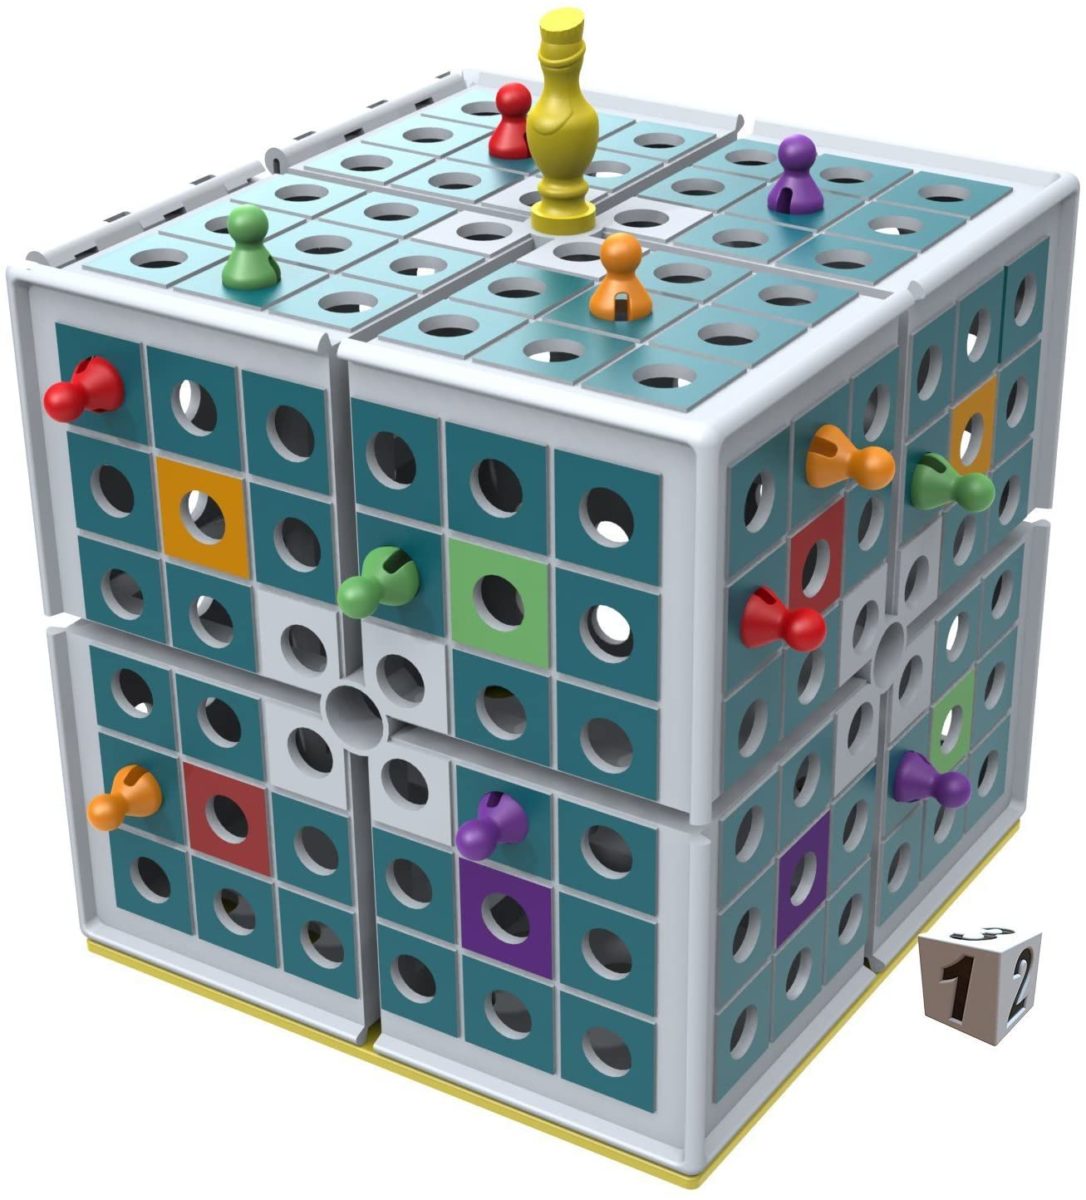 Squashed 3D Strategy Board Game - Top Toys and Gifts for Nine Year Old Boys 1